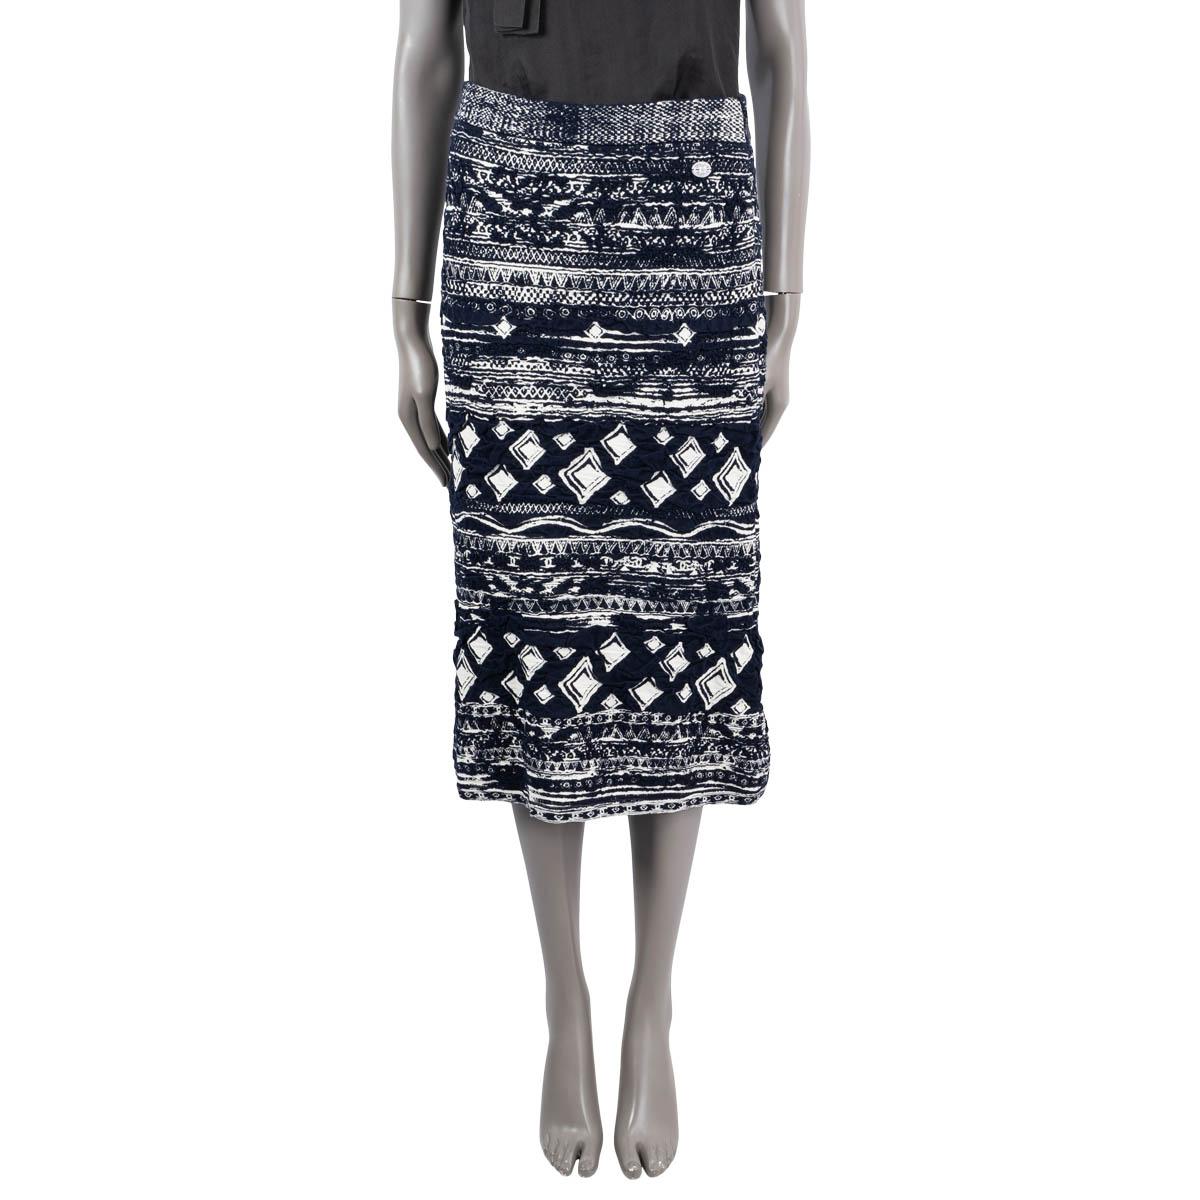 100% authentic Chanel jacquard knit skirt in navy blue and ivory cotton (50%), viscose (40%) and polyester (10%). Elastic waist band with button. Unlined. Has been worn and is in excellent condition.

2018 Paris-Greece